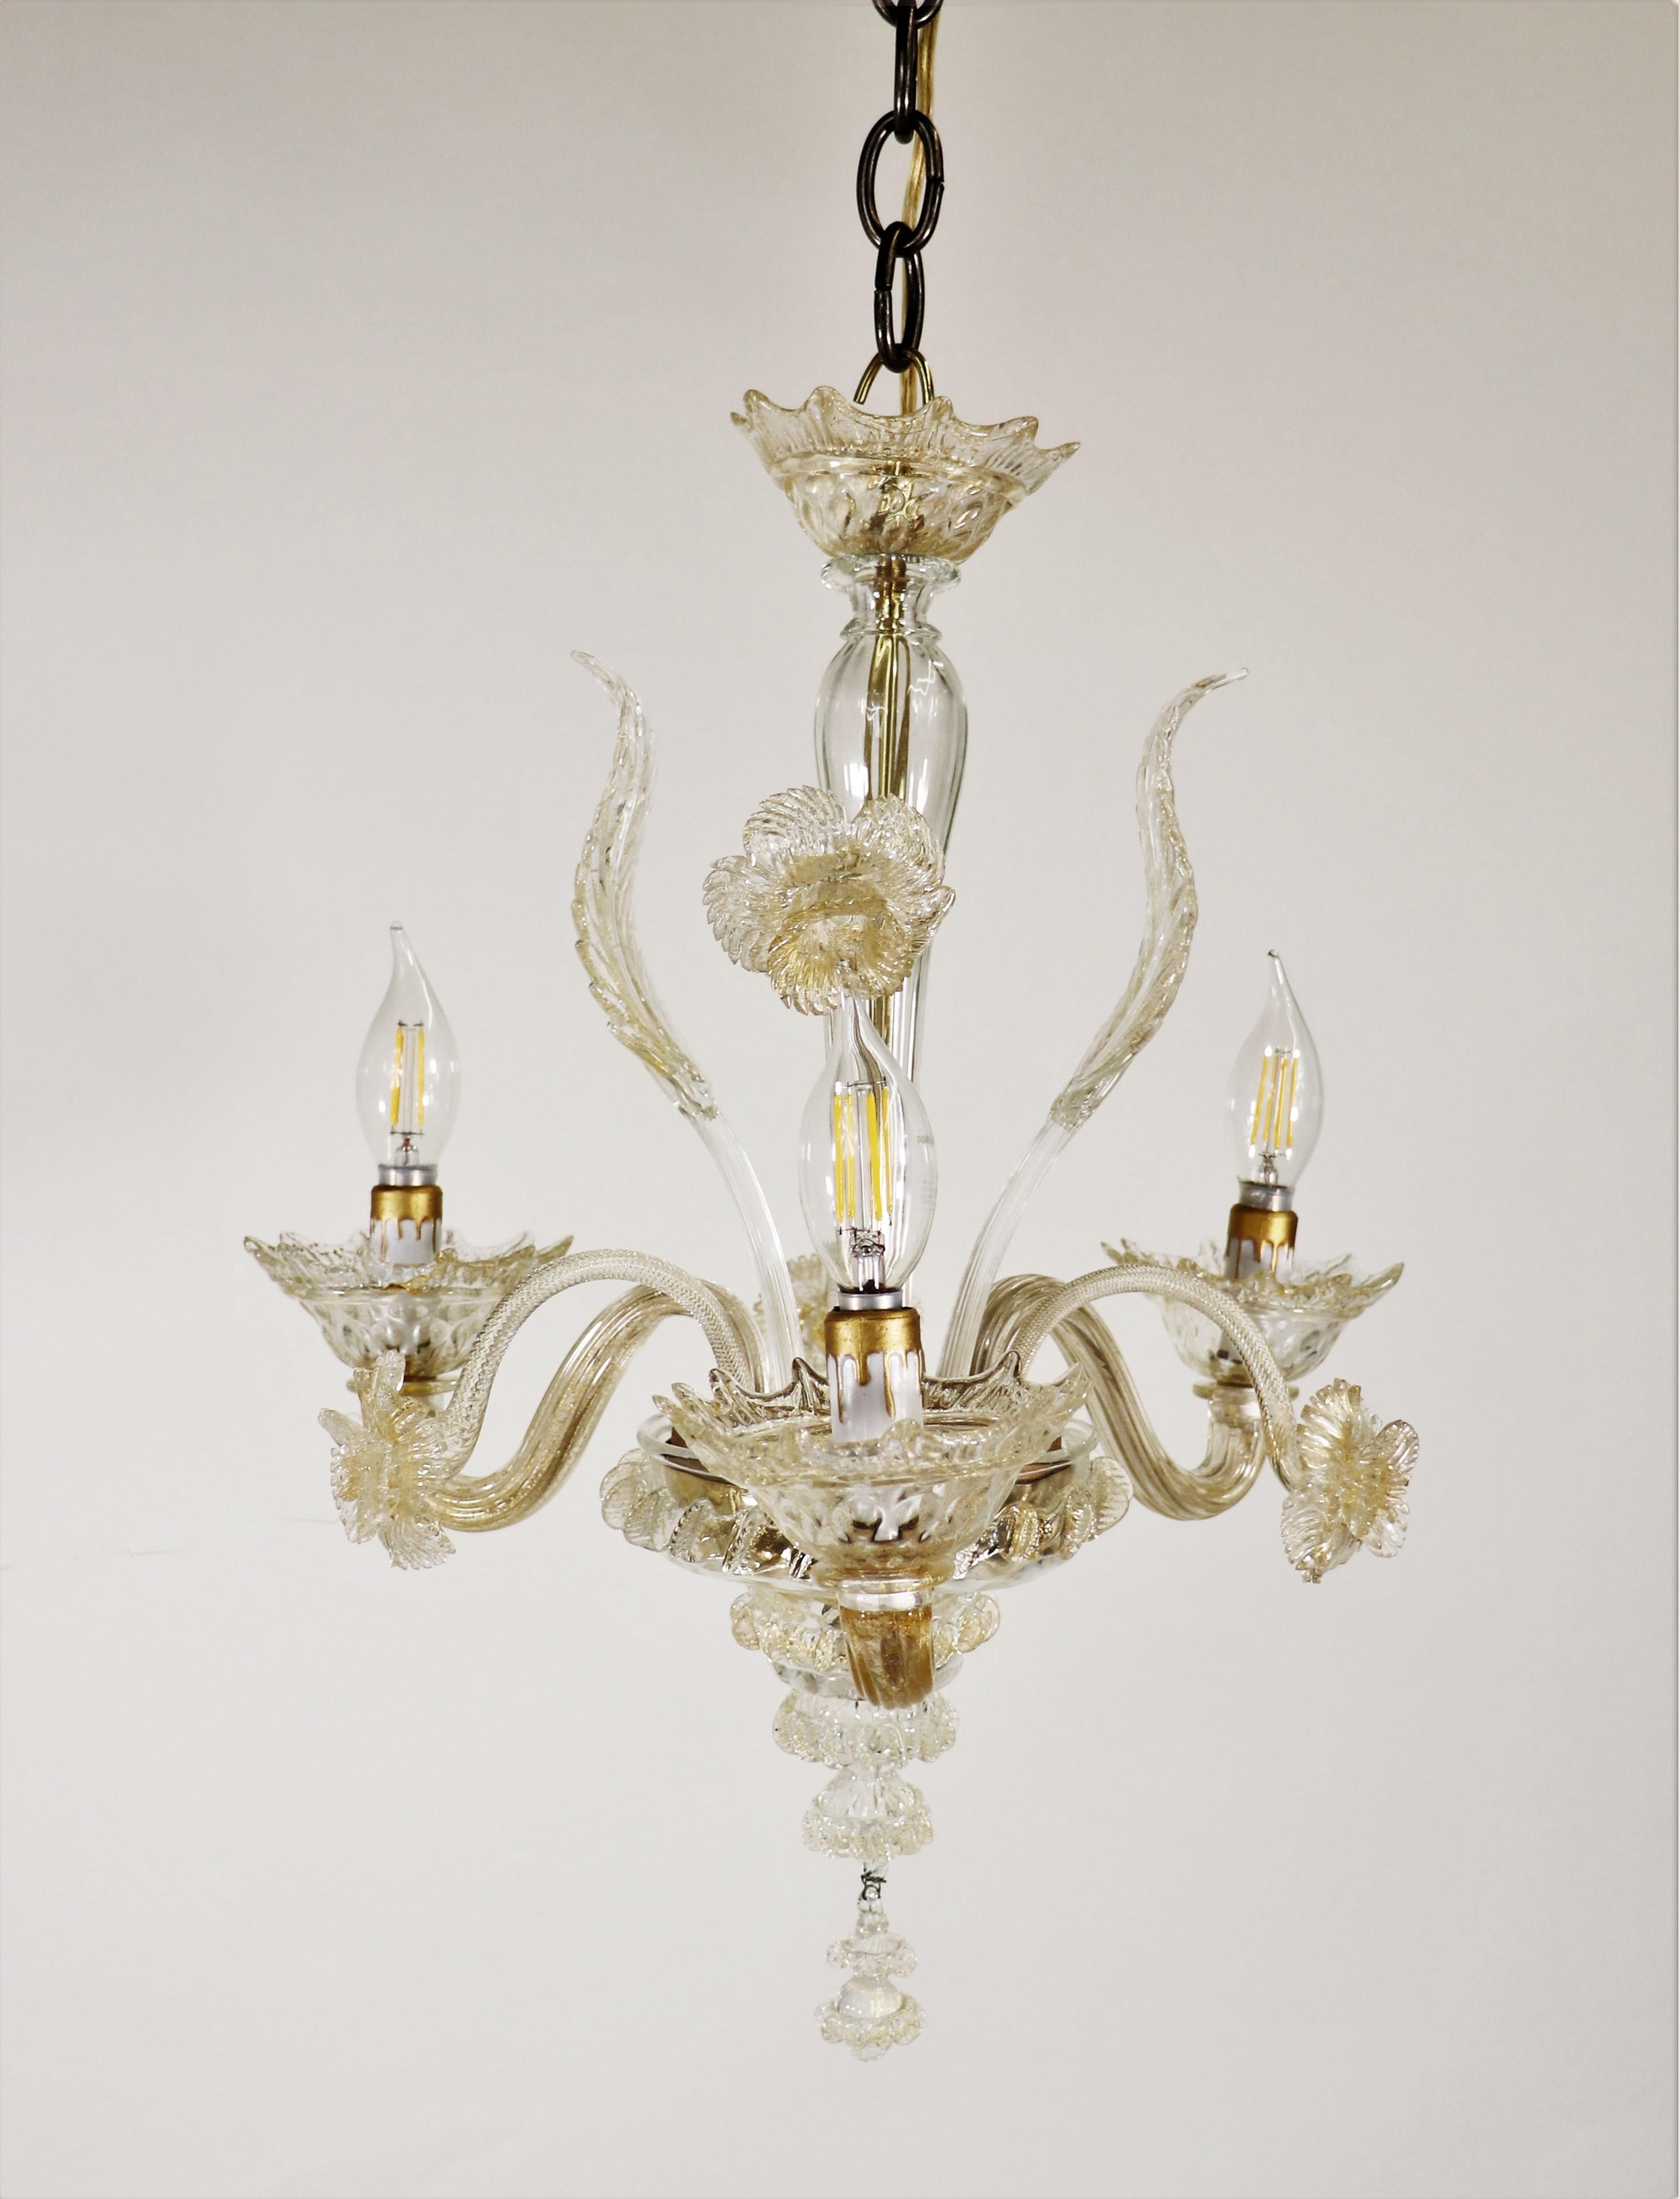 Despite its small size, this classic floral Murano three-arm chandelier creates quite a statement. Stylized with sprouting daffodils and leaves, the undulating arms hold bobeches with petal-shaped rims. The hints of gold dust dispersed throughout